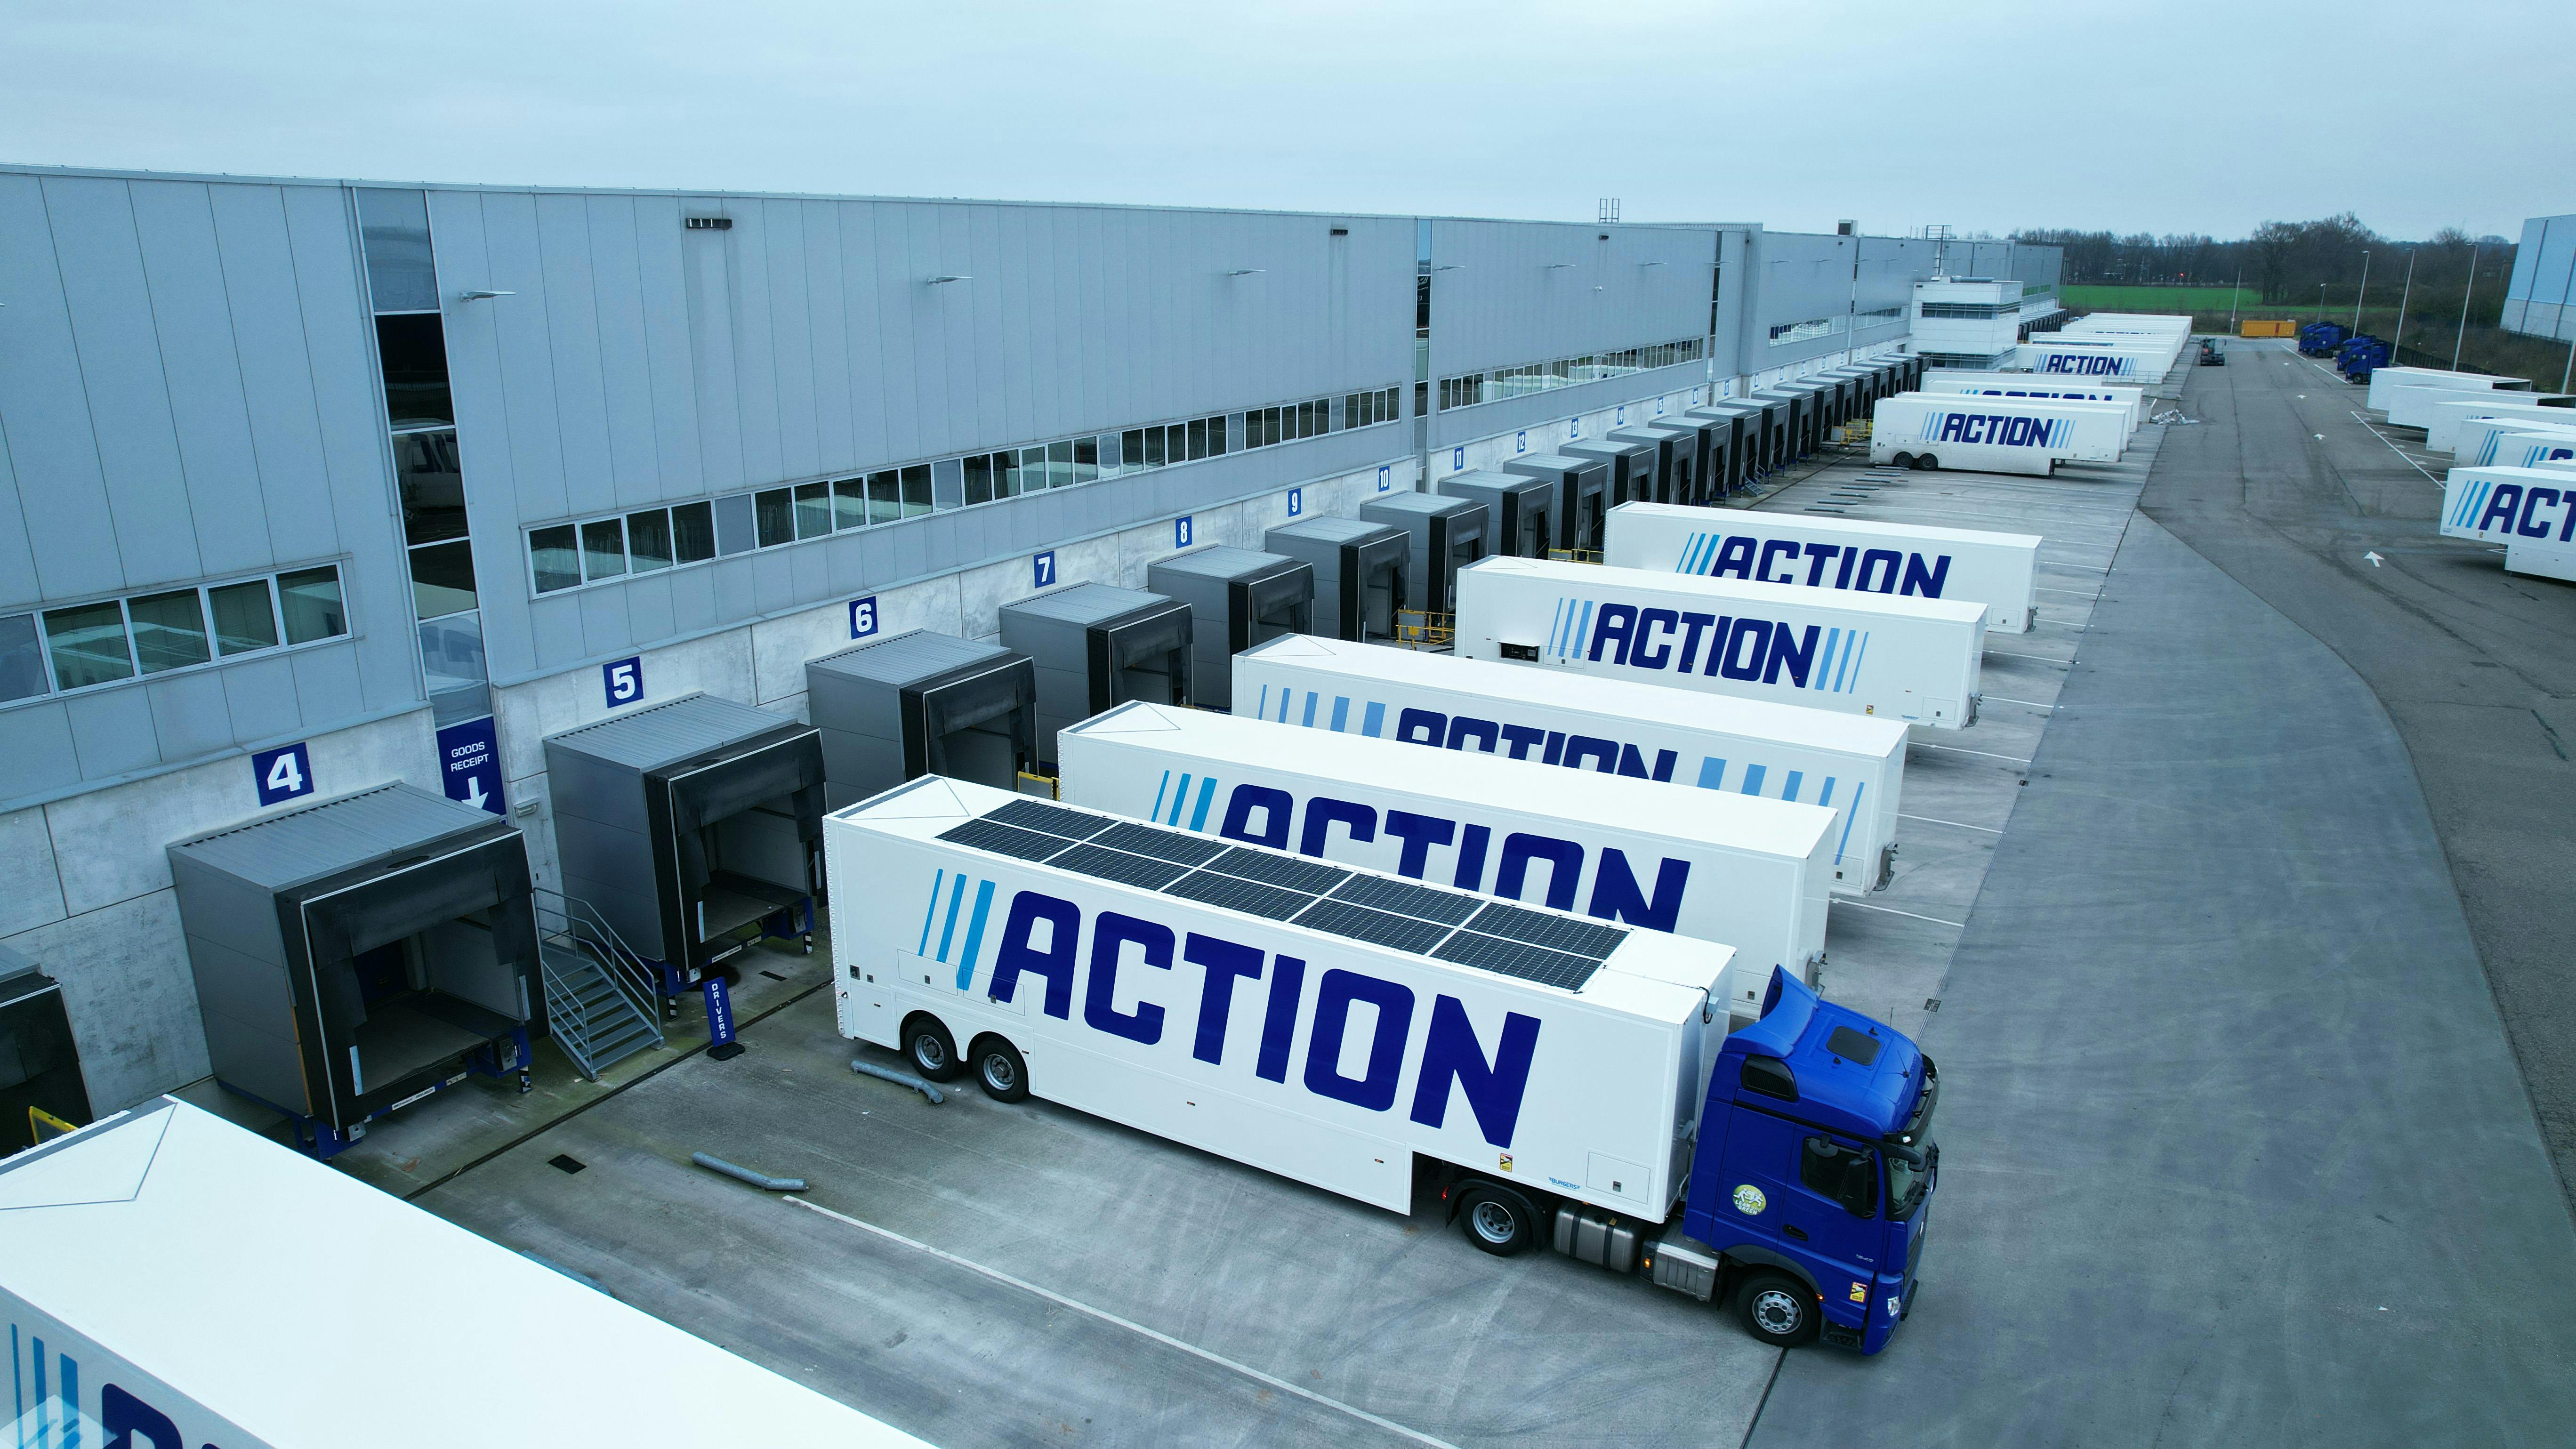 Action powers its truck with solar panels through SolarOnTop 